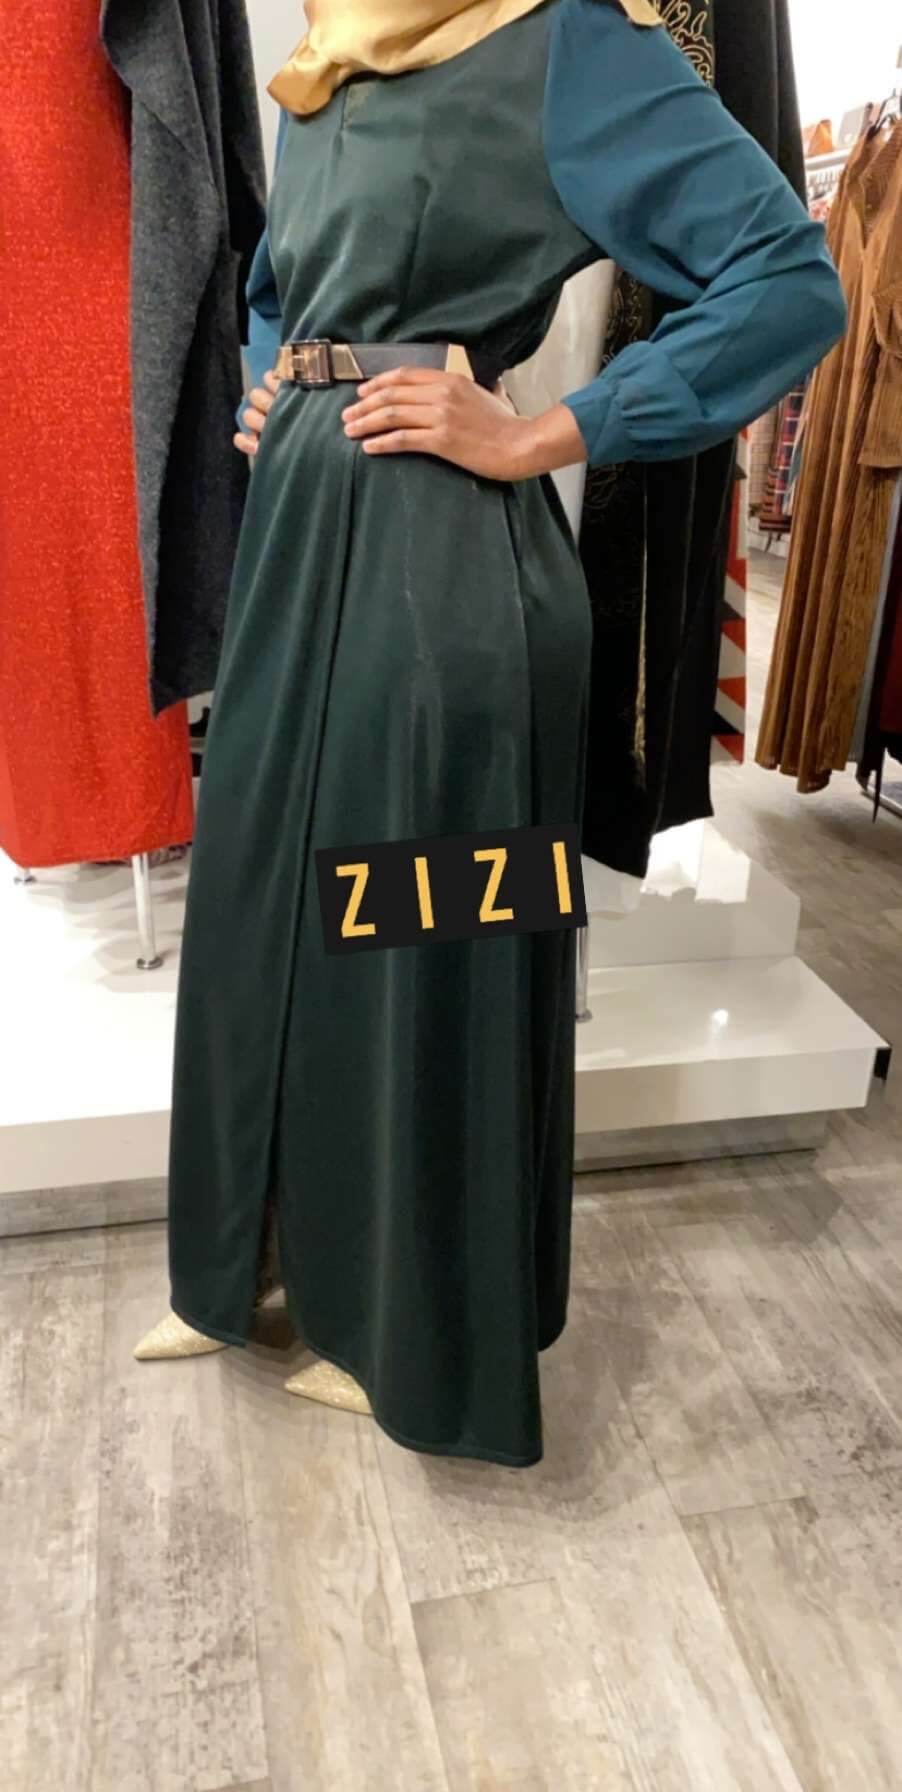 Aisha Lace Evening Dress in dark green color available at ZIZI Boutique